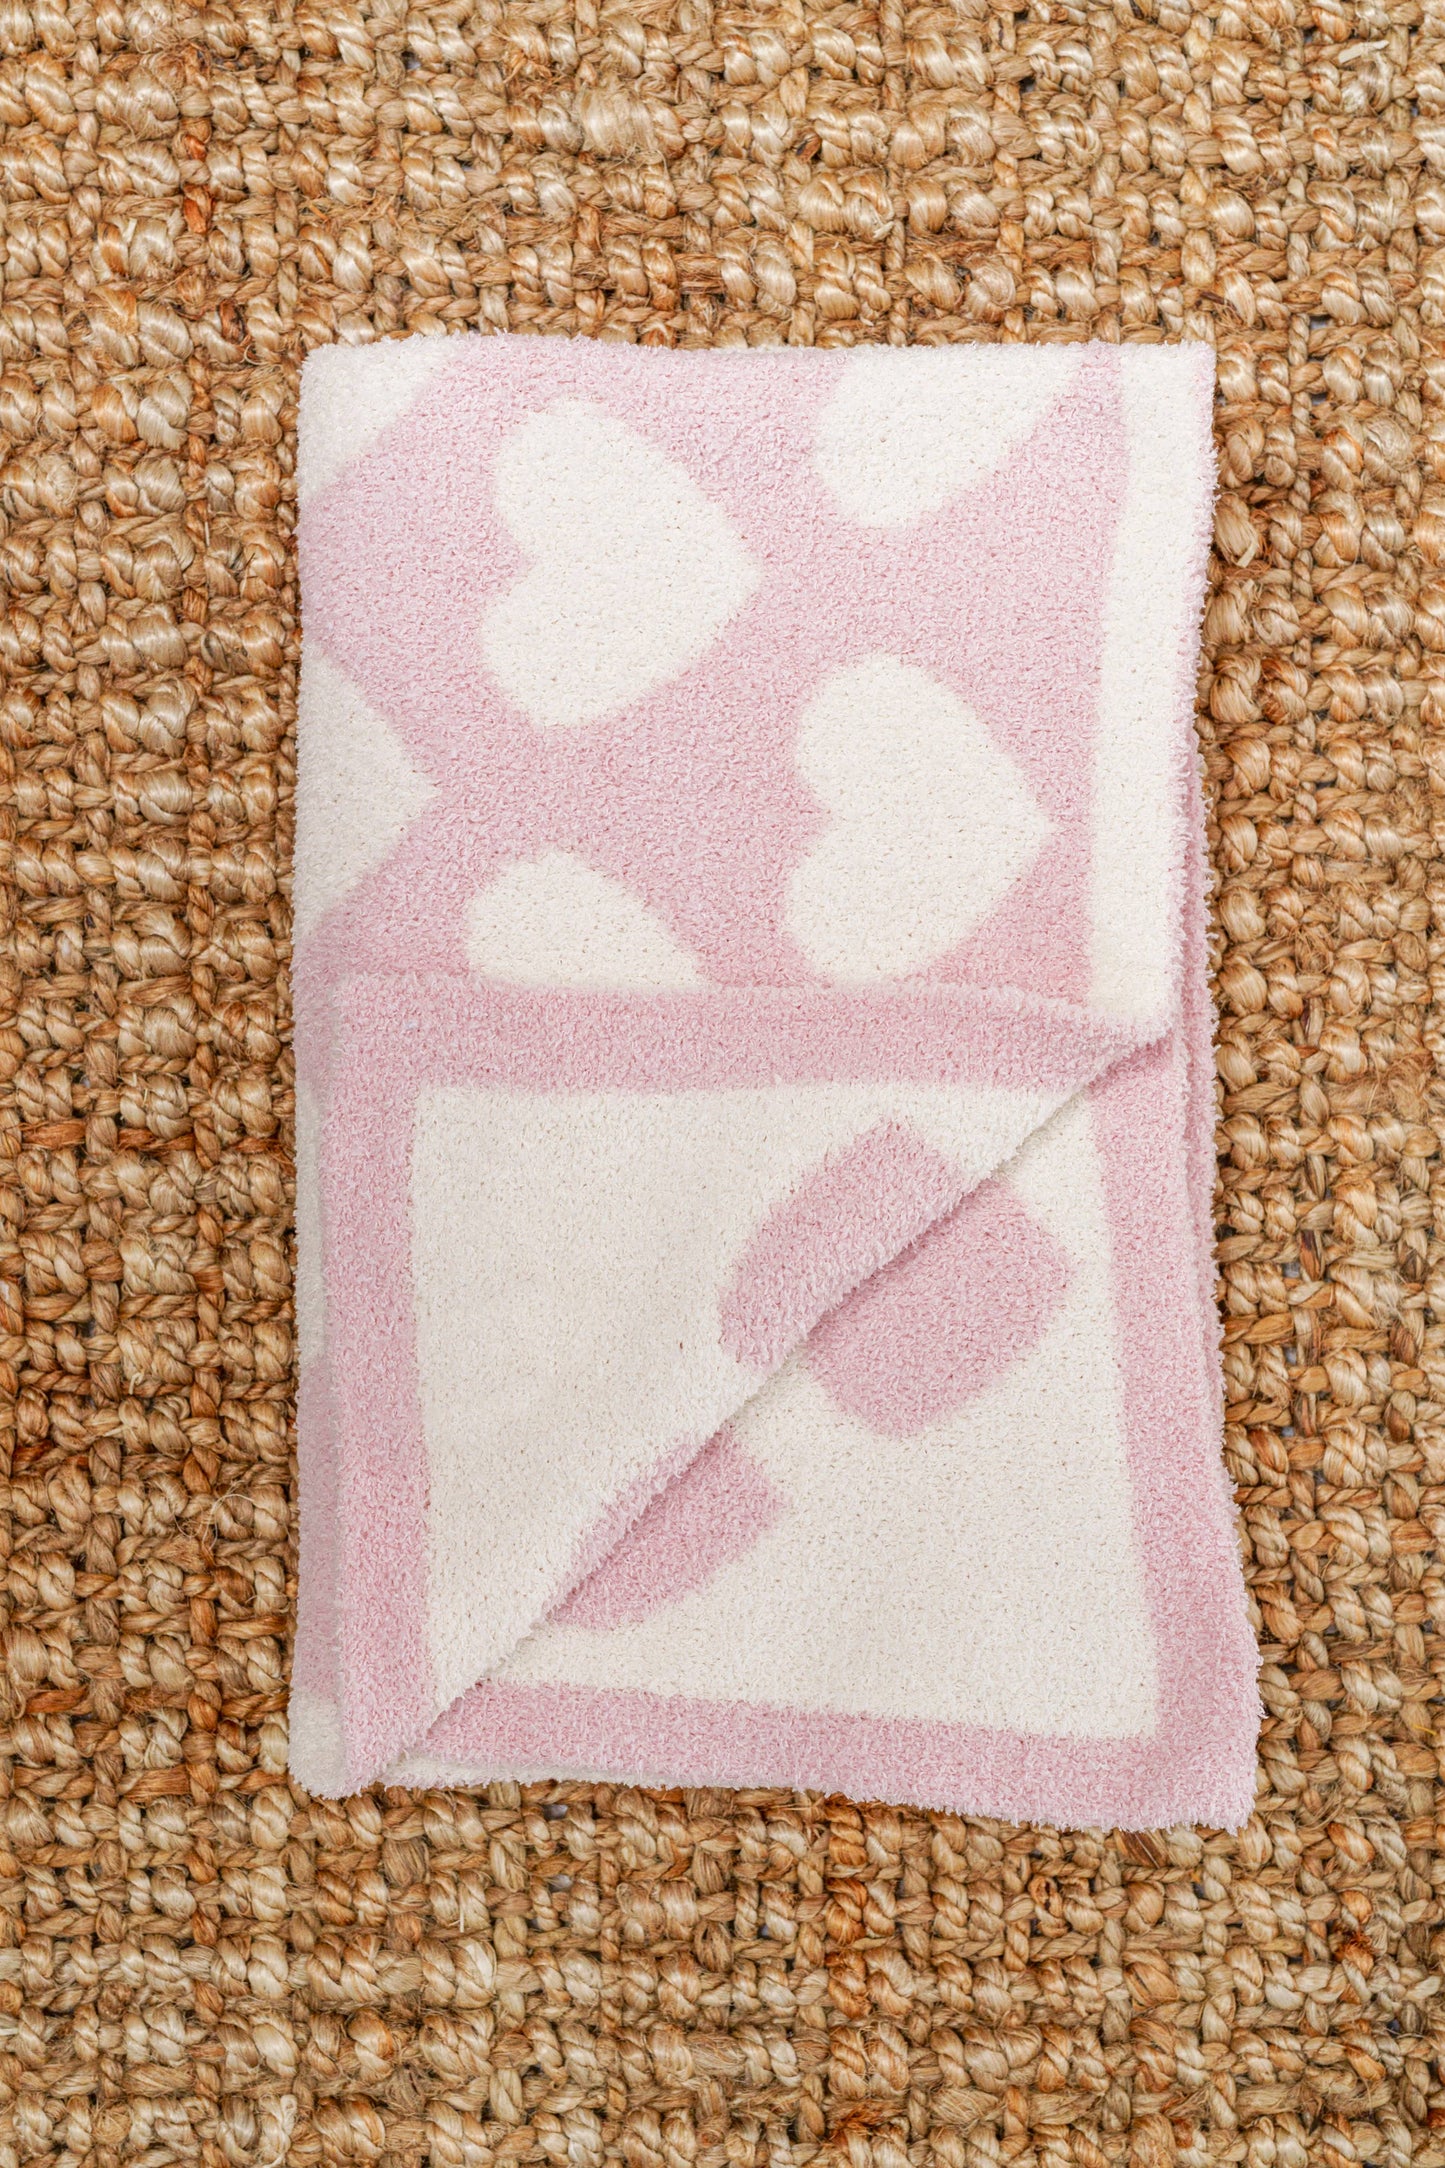 Luxury Cozy Baby Blankets - Pink Hearts